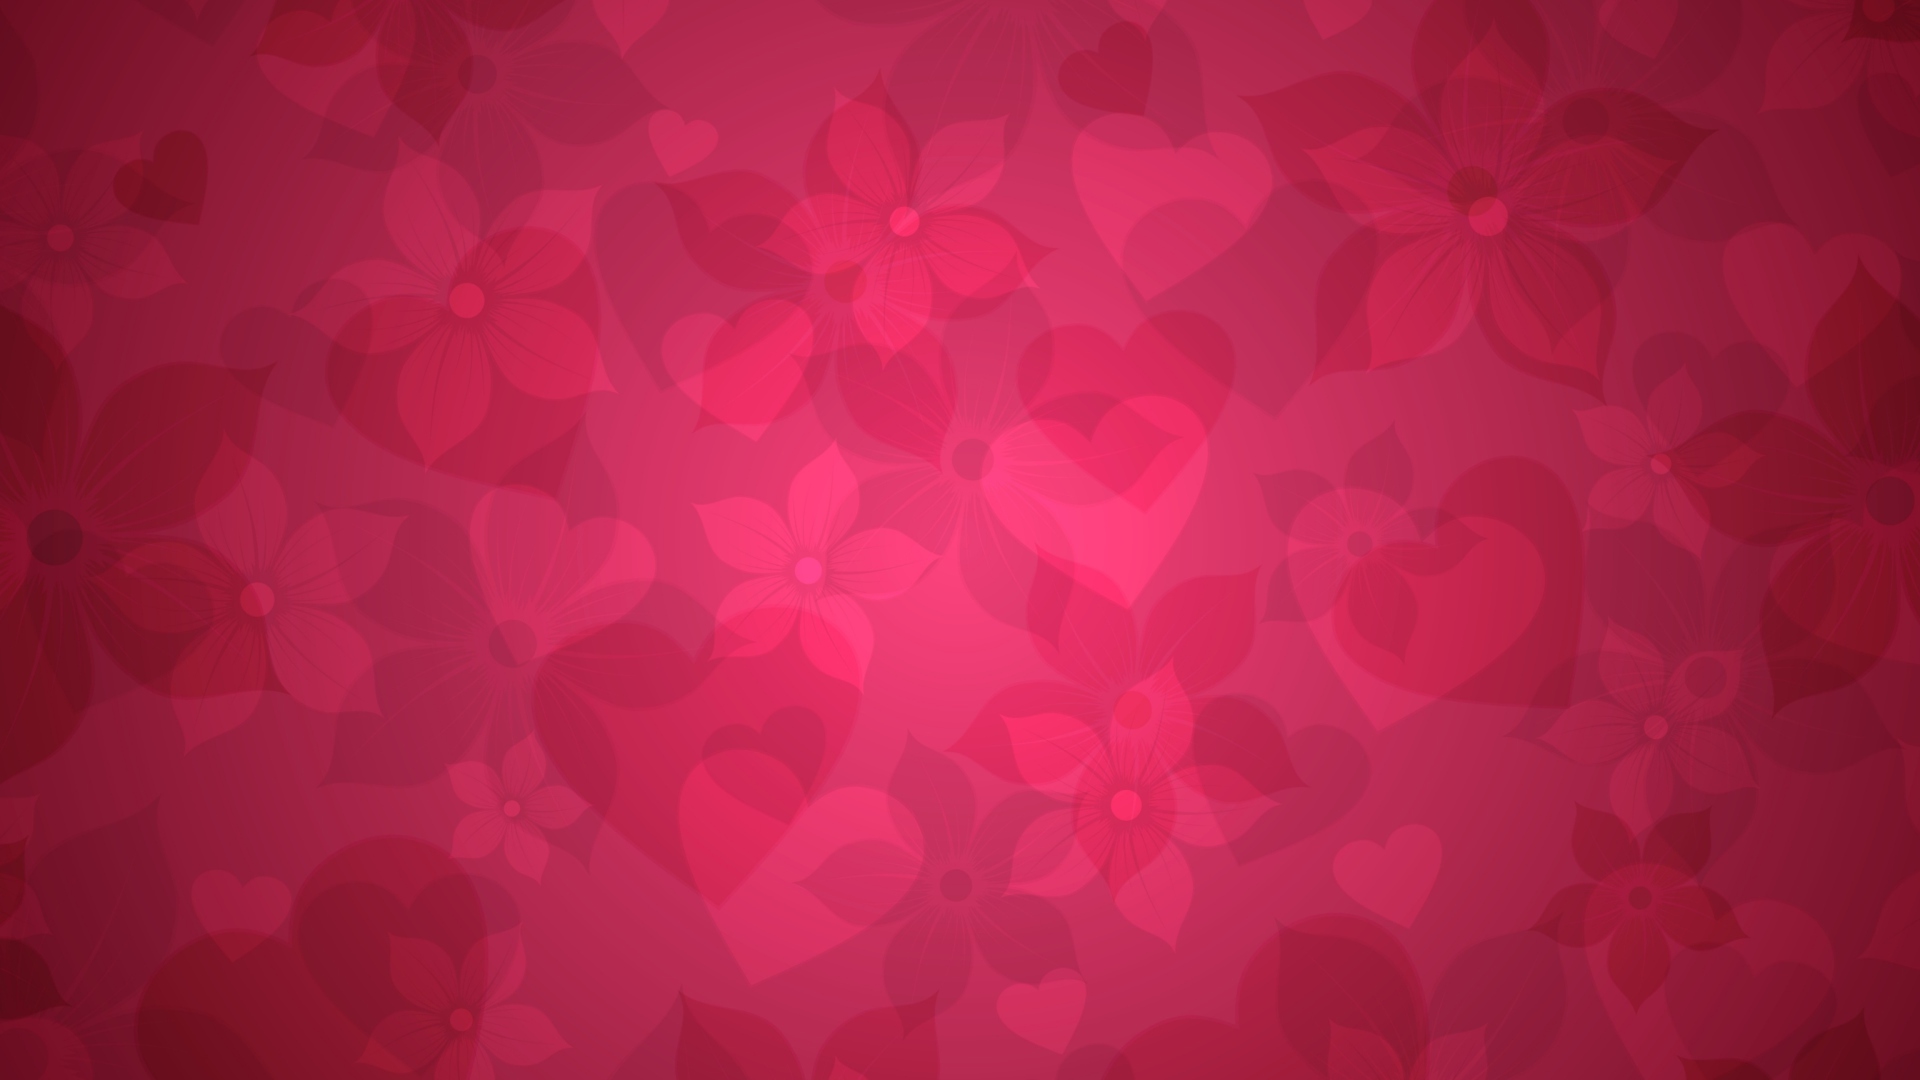 Pink Hearts And Flowers Pattern screenshot #1 1920x1080